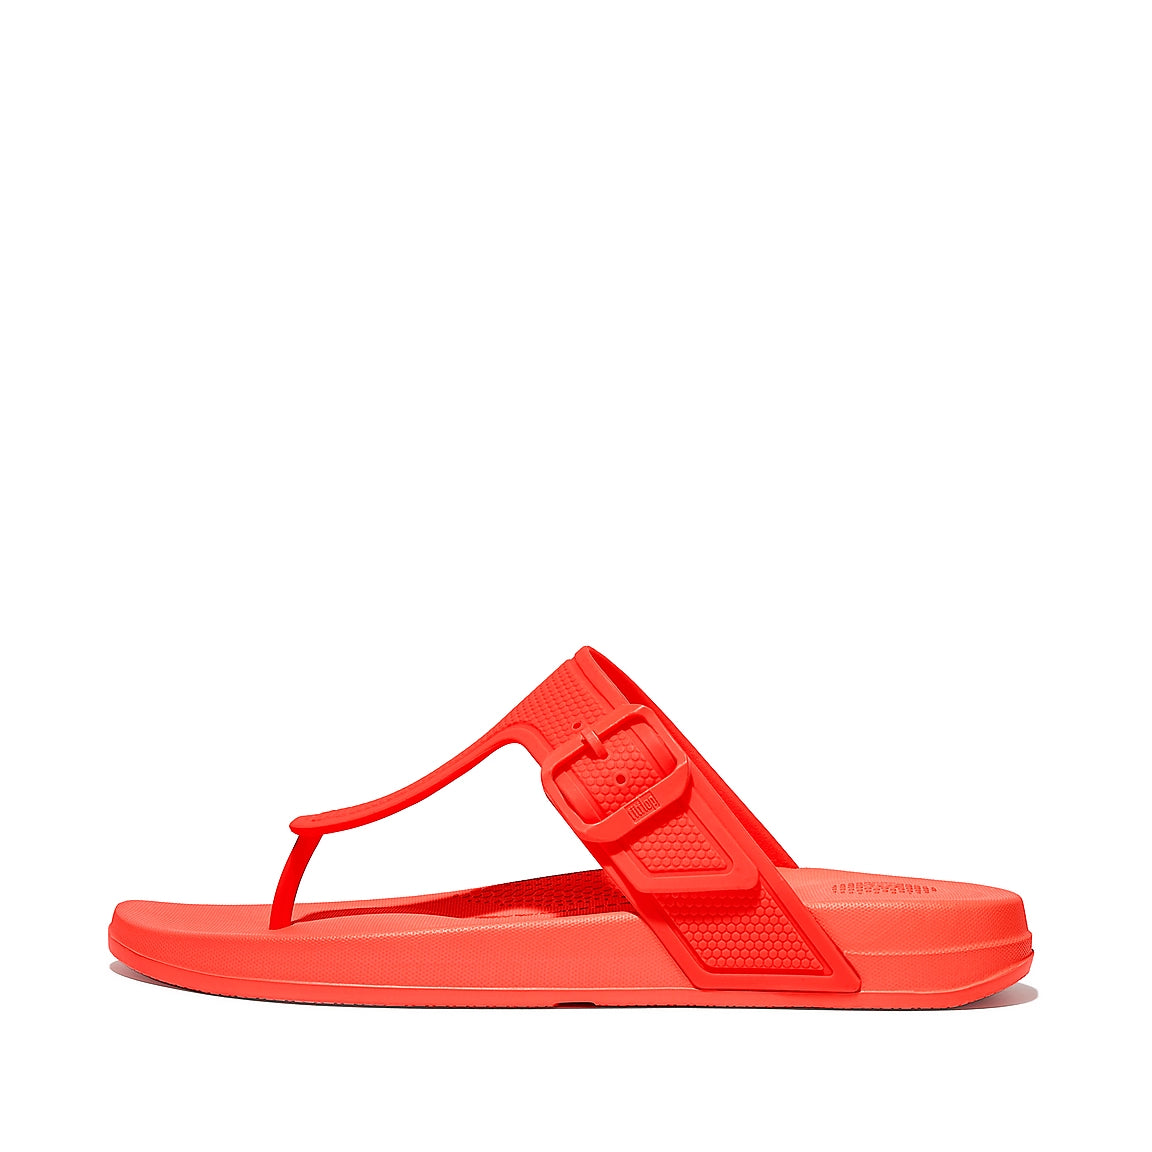 Fitflop Gb2 iQUSHION ADJ BUCKLE FLIP-FLOP